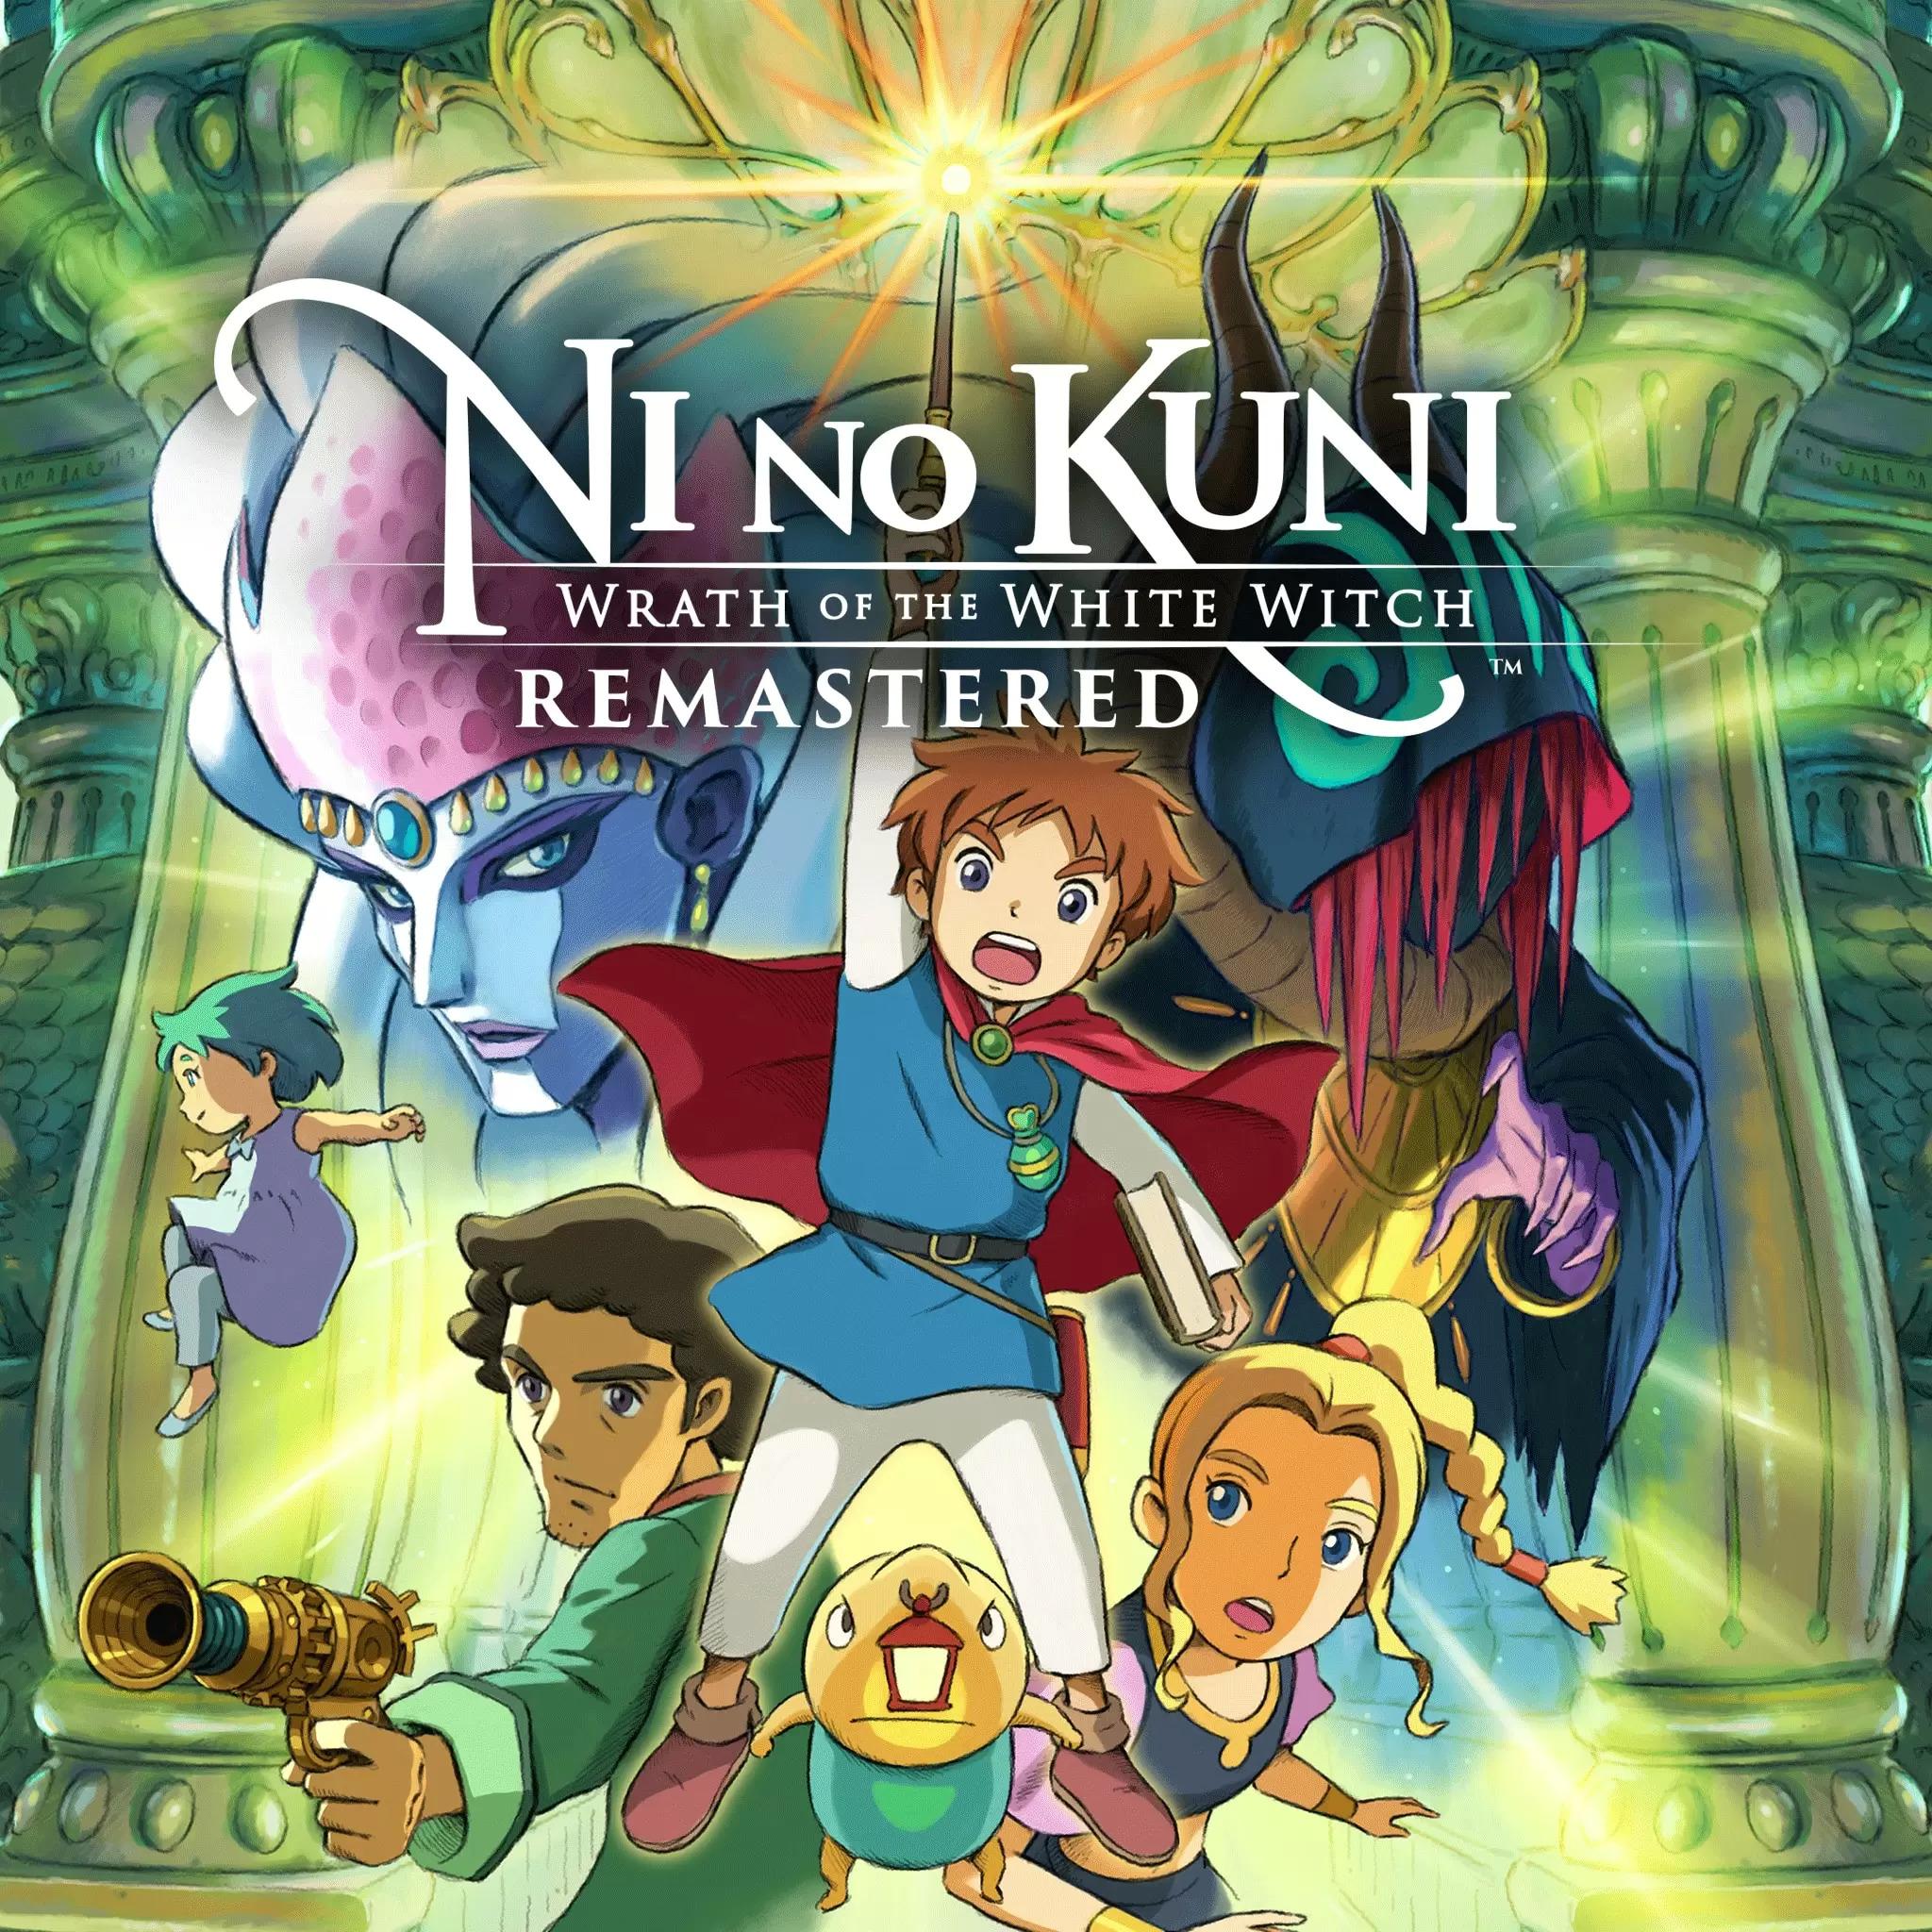 Ni no Kuni Wrath of the White Witch Nintendo Switch for $9.99